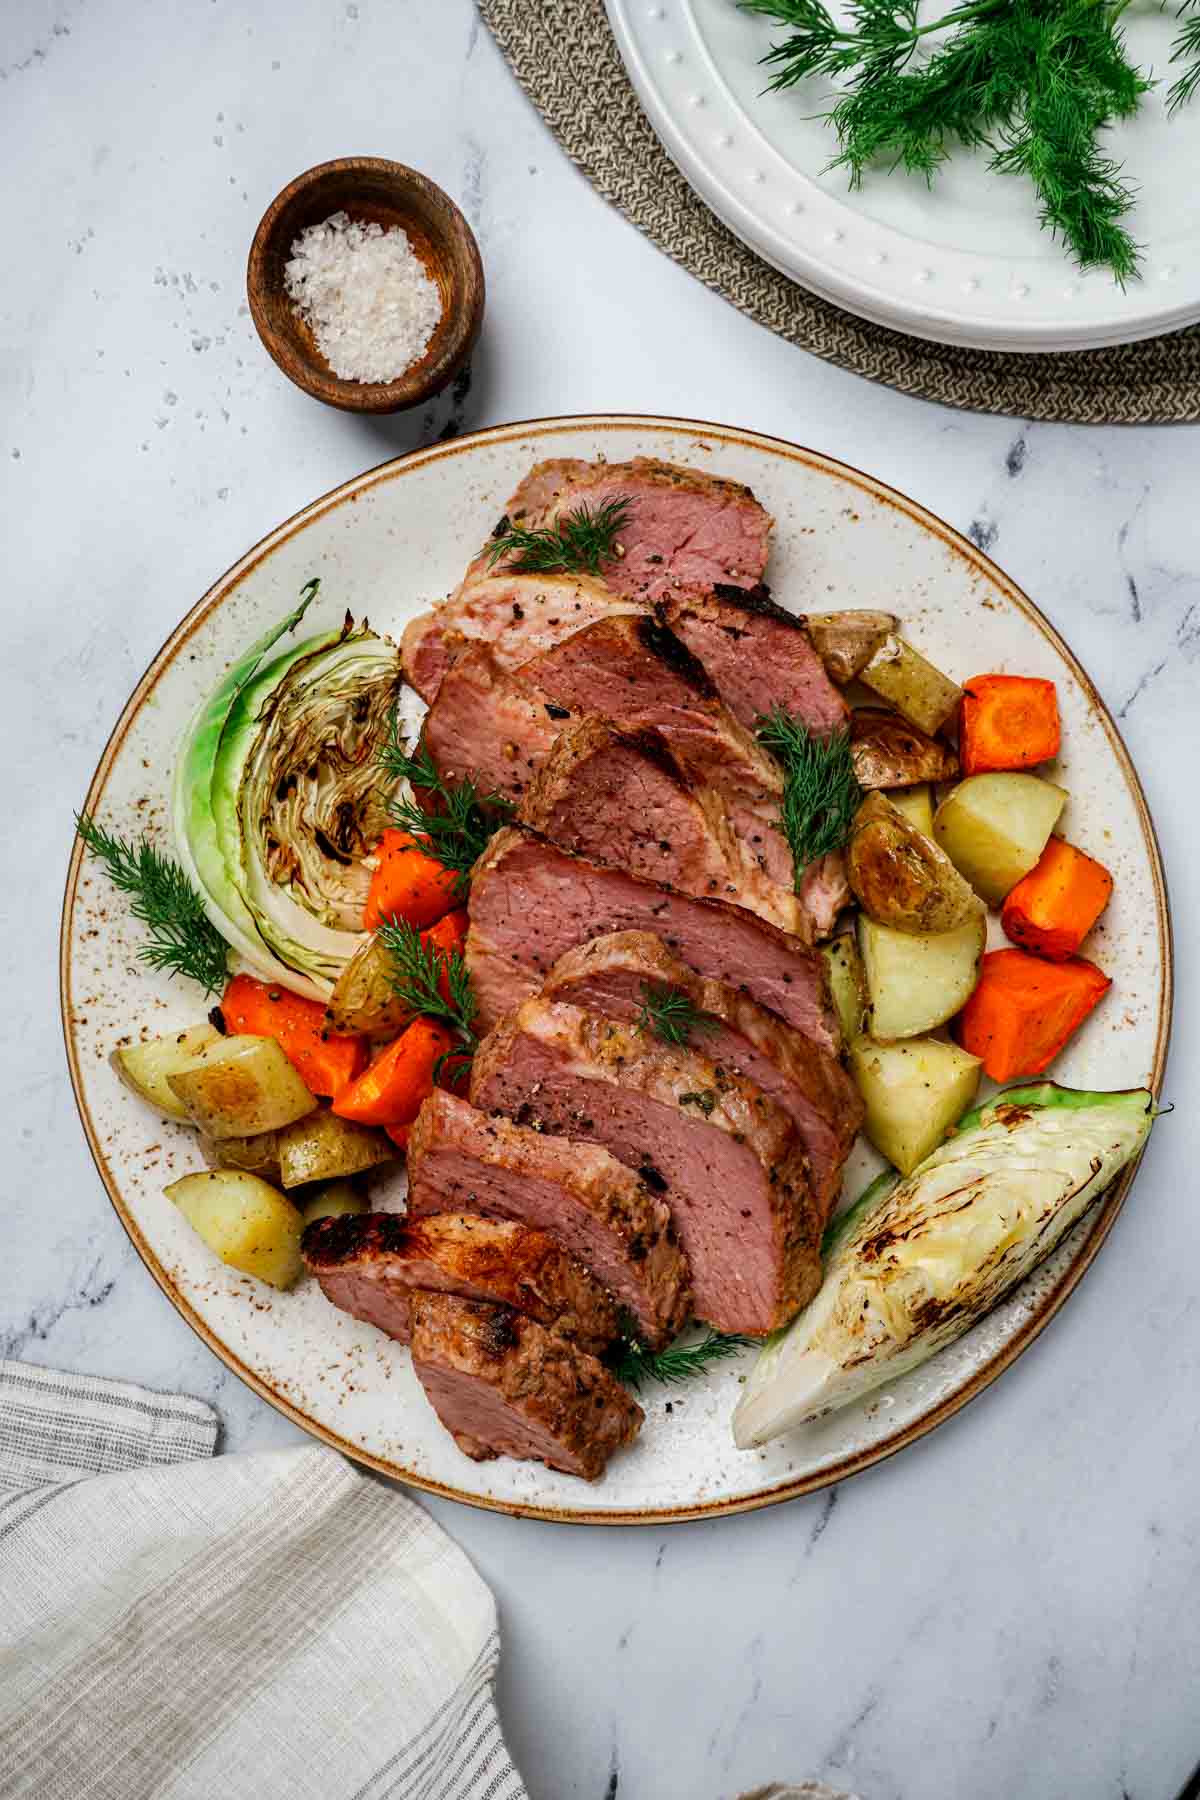 https://www.wenthere8this.com/wp-content/uploads/2023/03/sous-vide-corned-beef-3.jpg